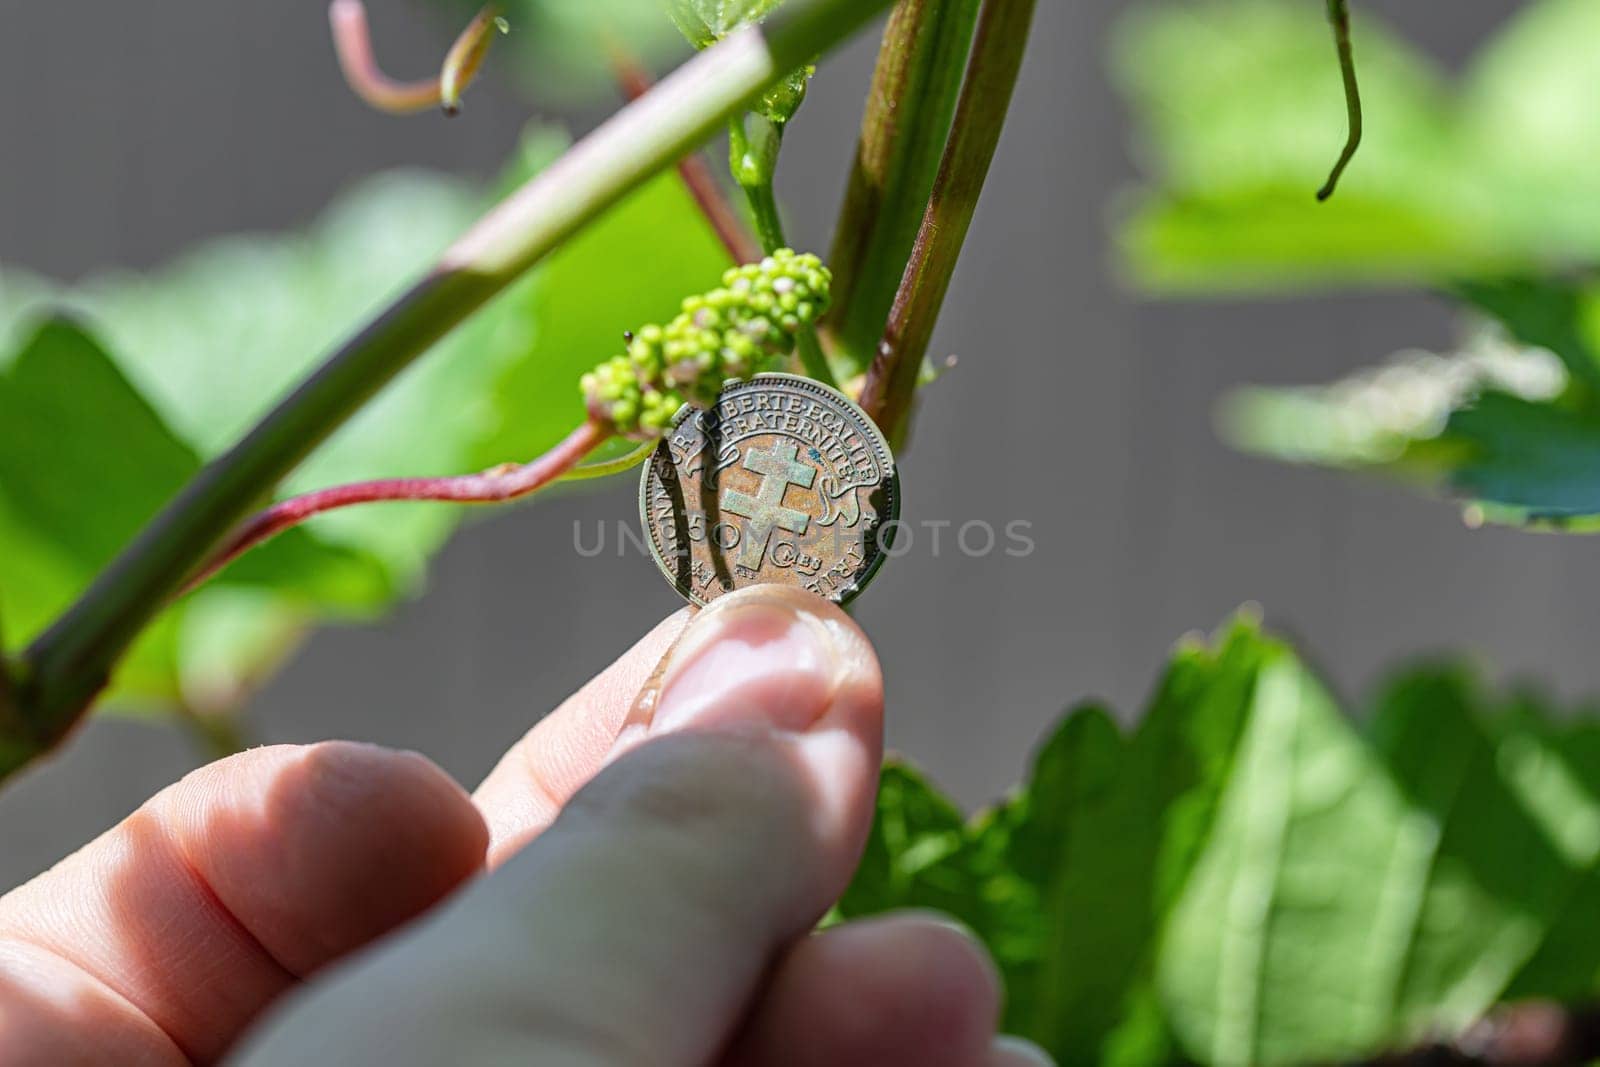 A very small grape brush against the background of a 50 centimes coin of French equatorial Africa